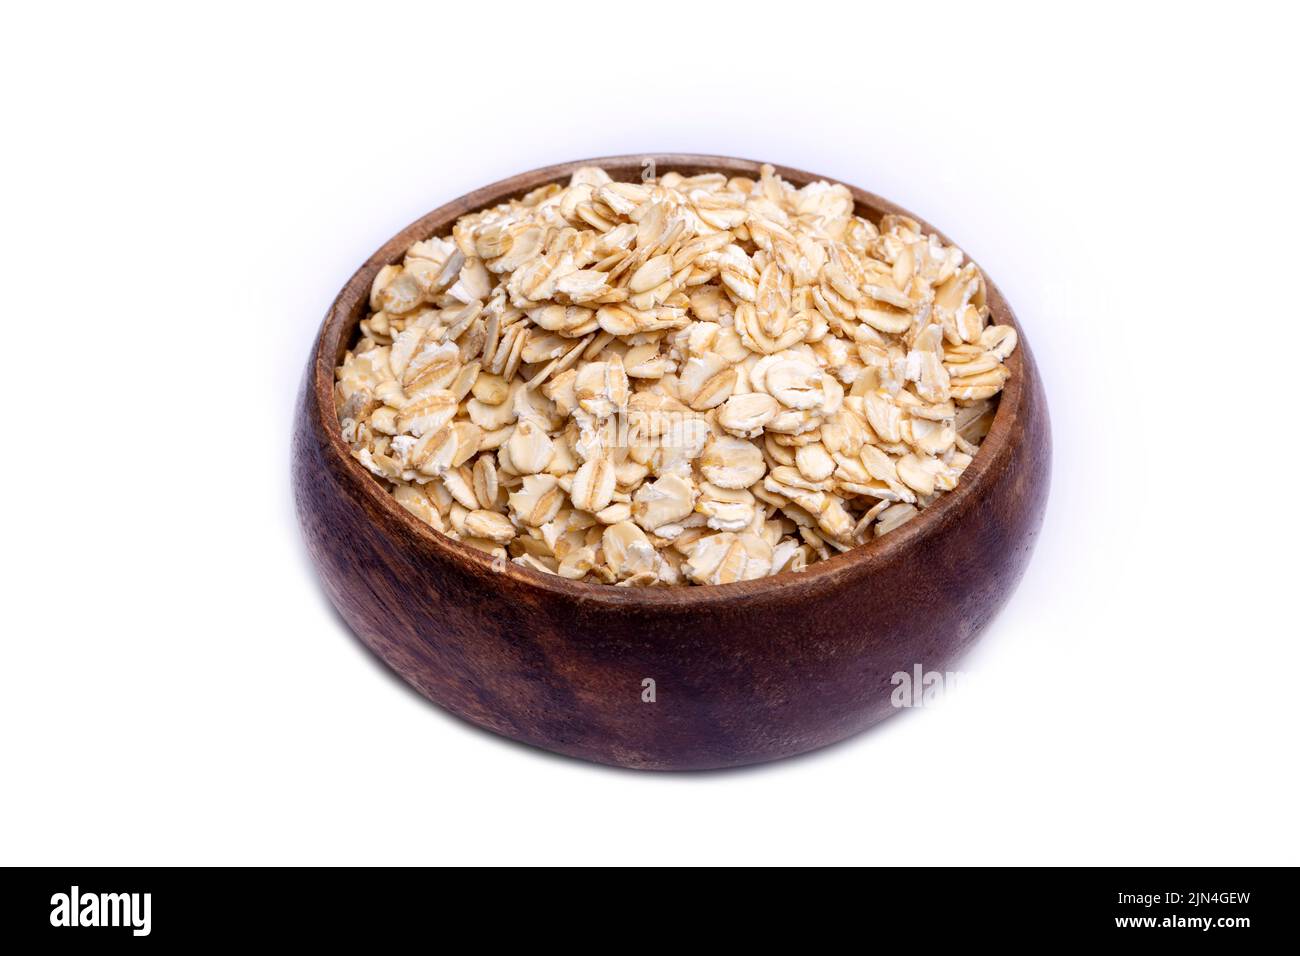 Heap of dry rolled oats isolated Stock Photo